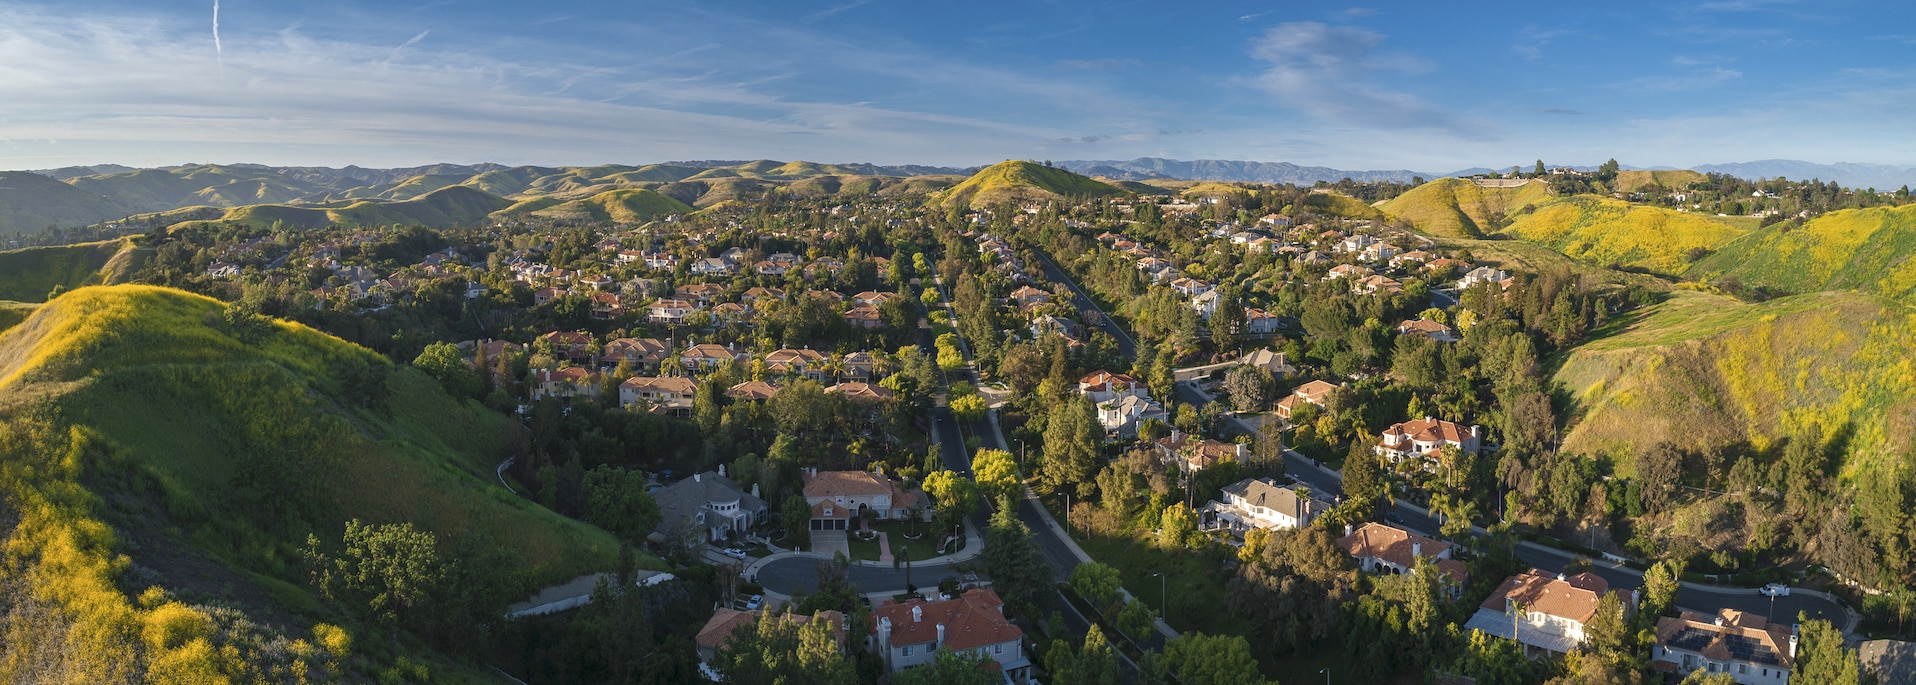 Calabasas City in Los Angeles County is a popular home for celebrities